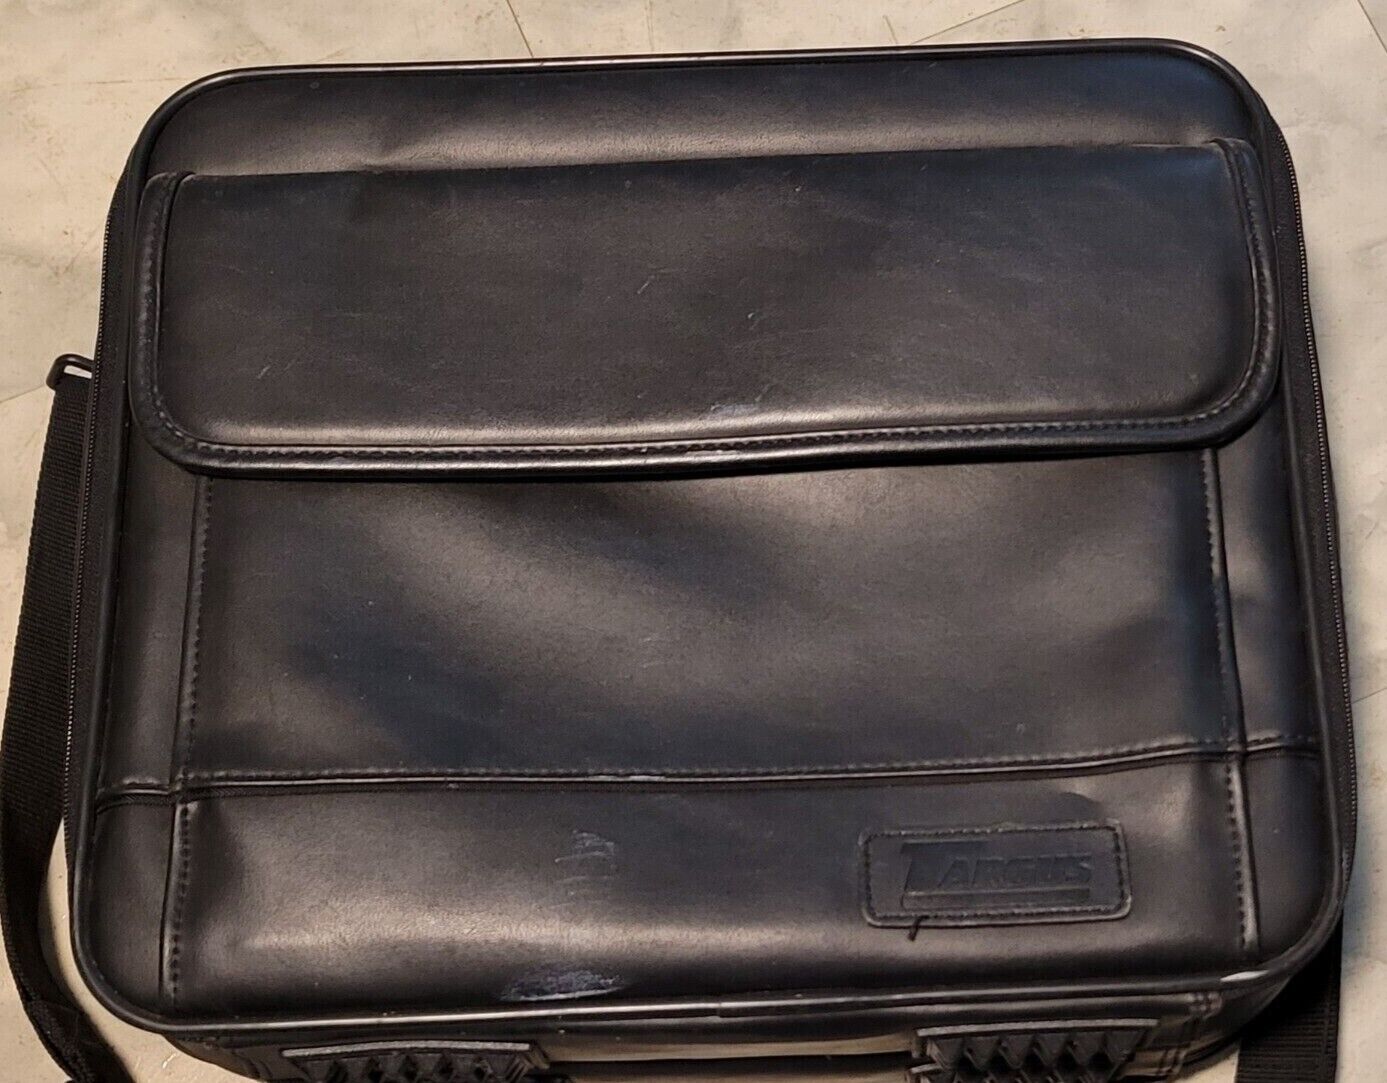 Targus Laptop Bag , Vintage Bag with great leather, strong has some wear styling